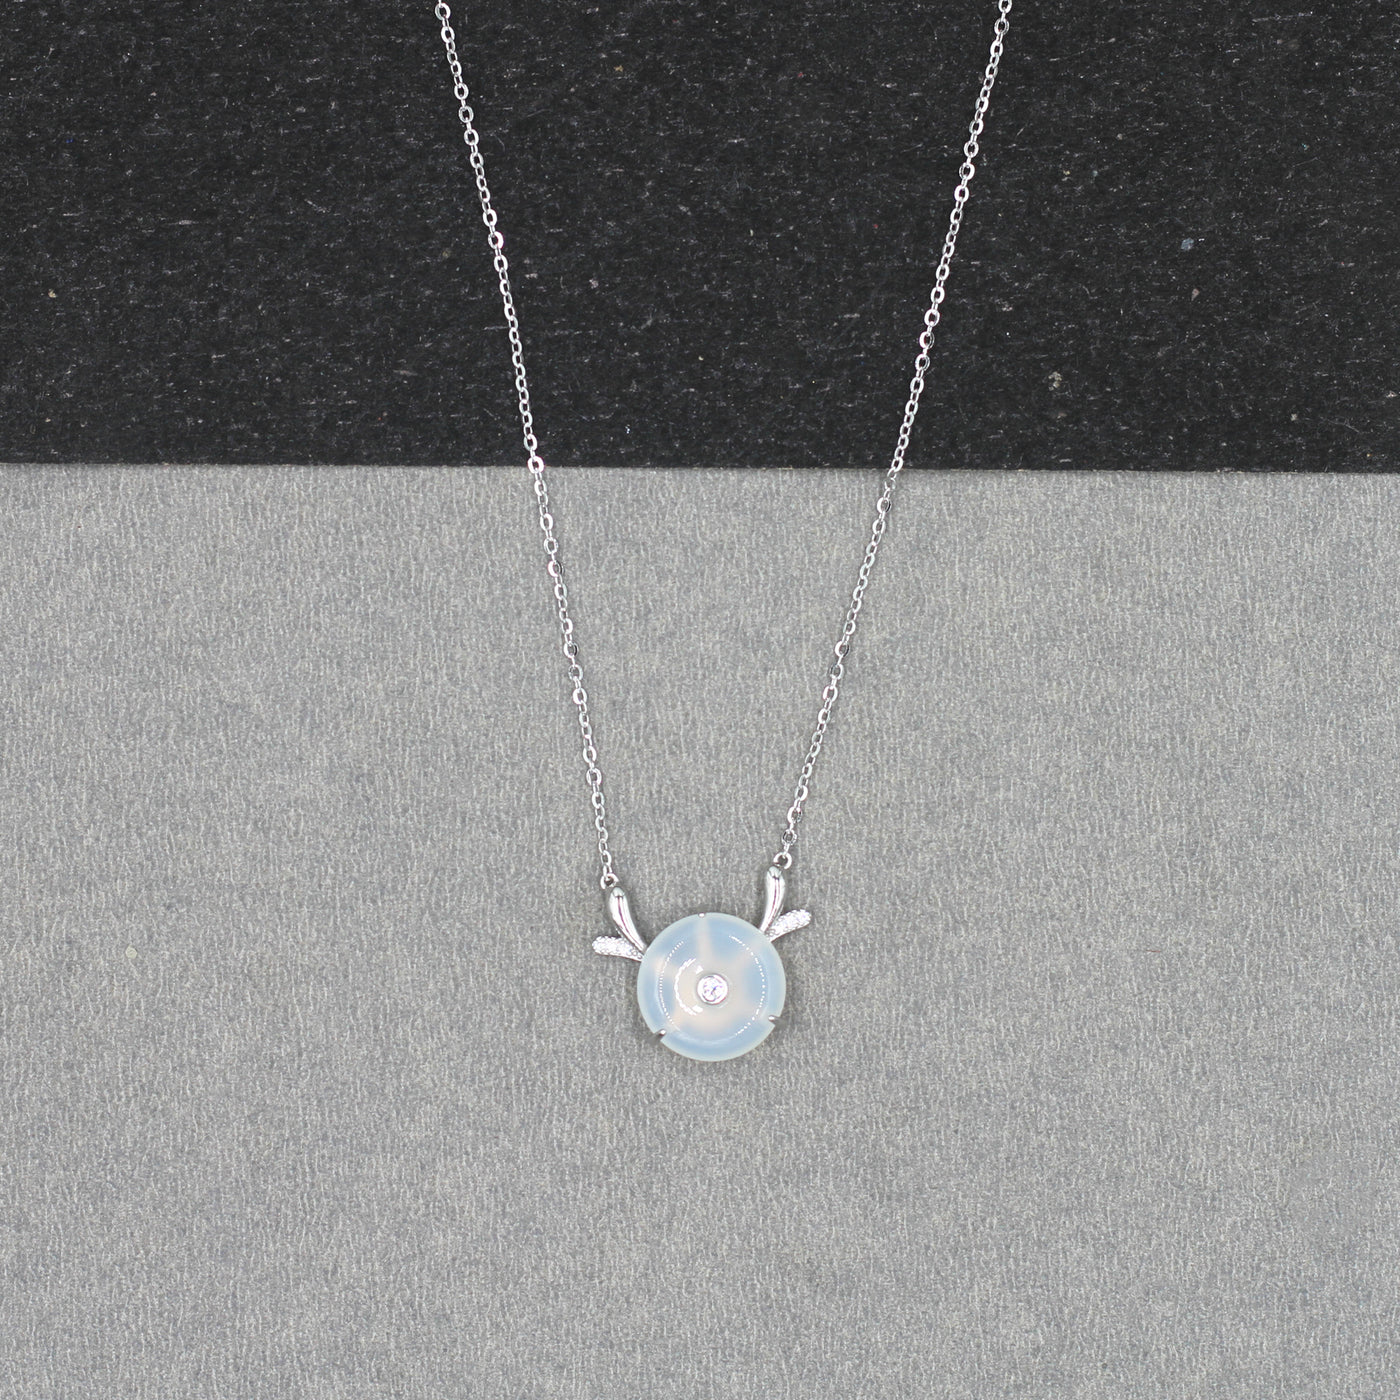 Silver-Plated CZ Pendant & Chain